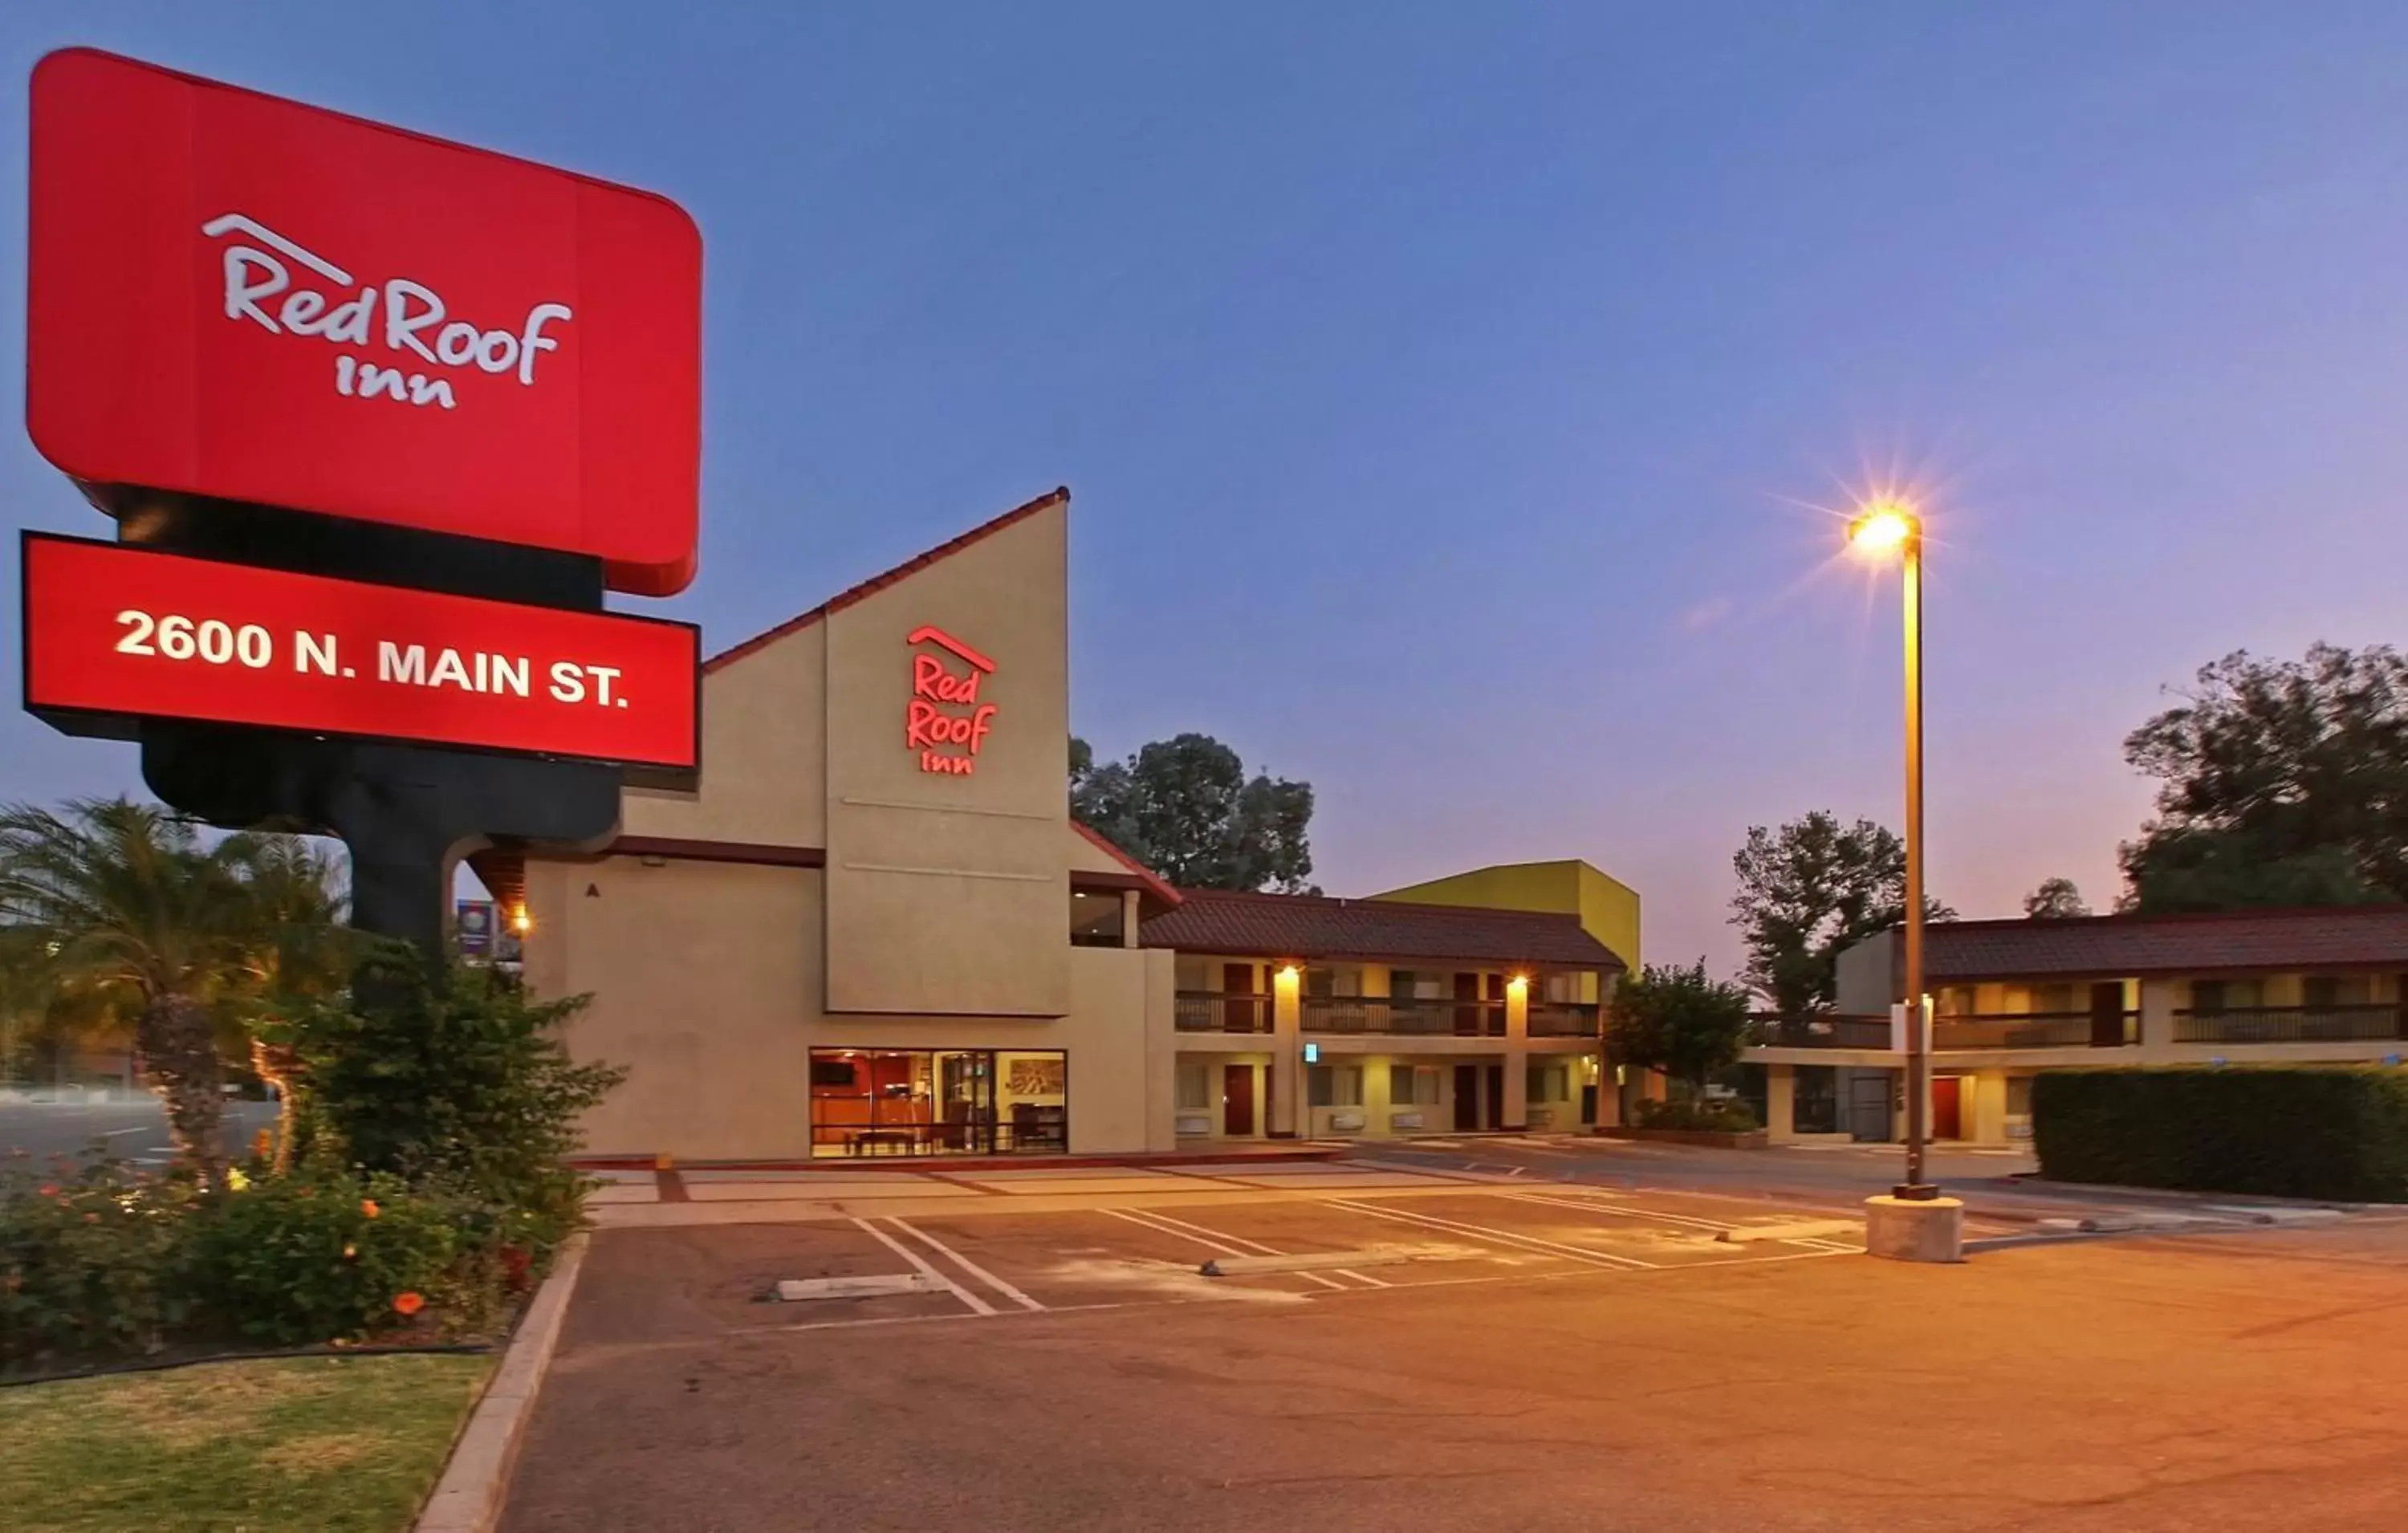 Property Building in Red Roof Inn Santa Ana